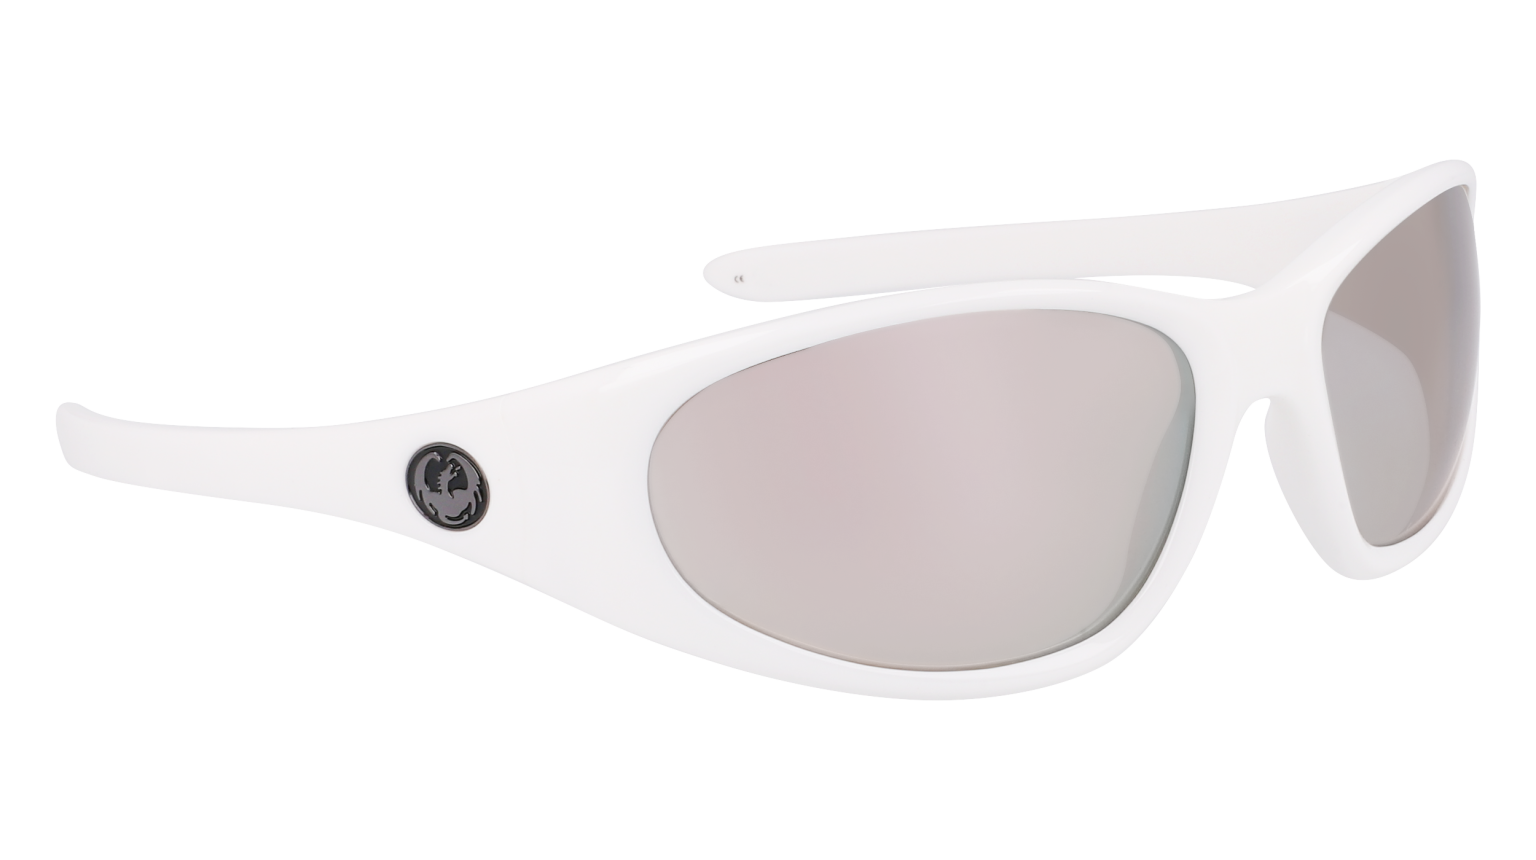 THE BOX 2 - White with Polarized Lumalens Silver Ionized Lens